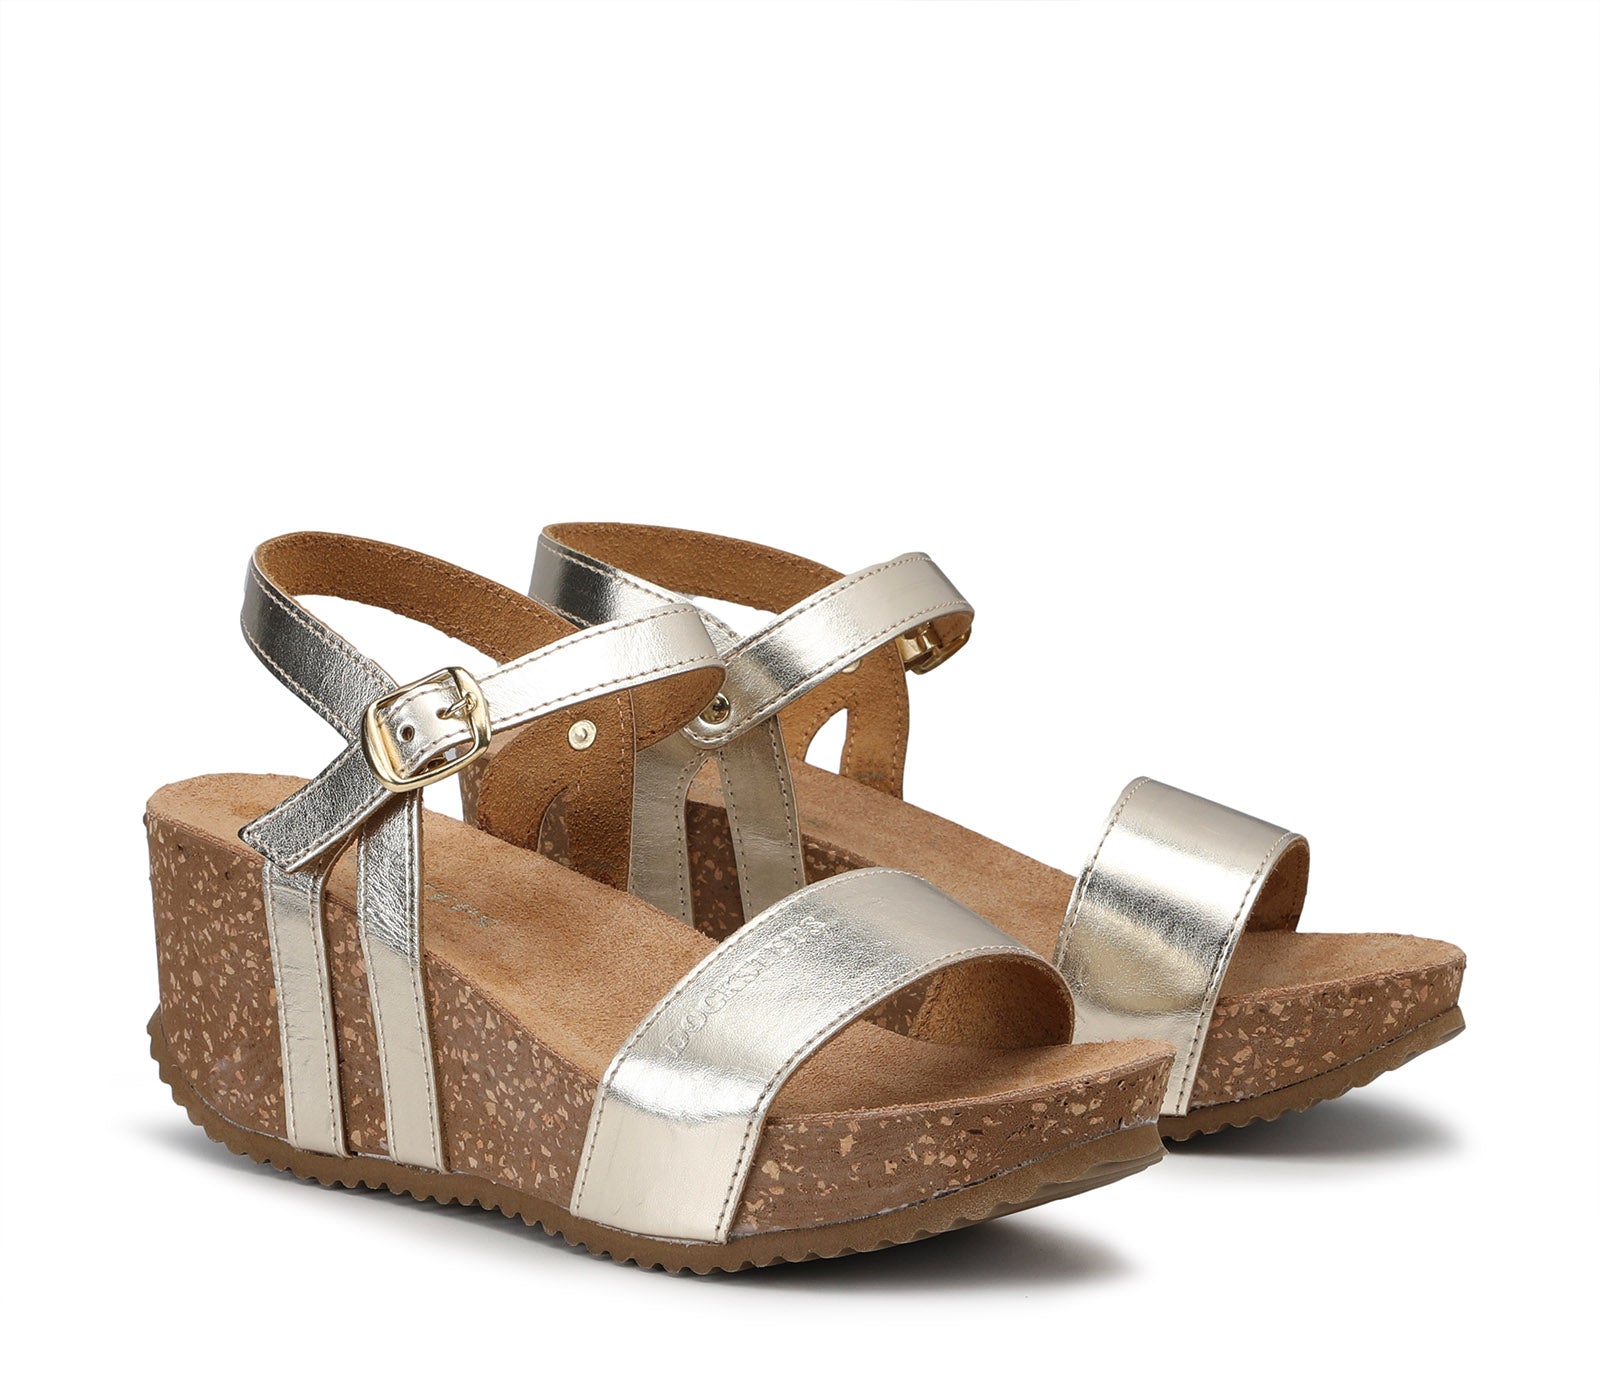 Docksteps women's sandals with wedge and strap 